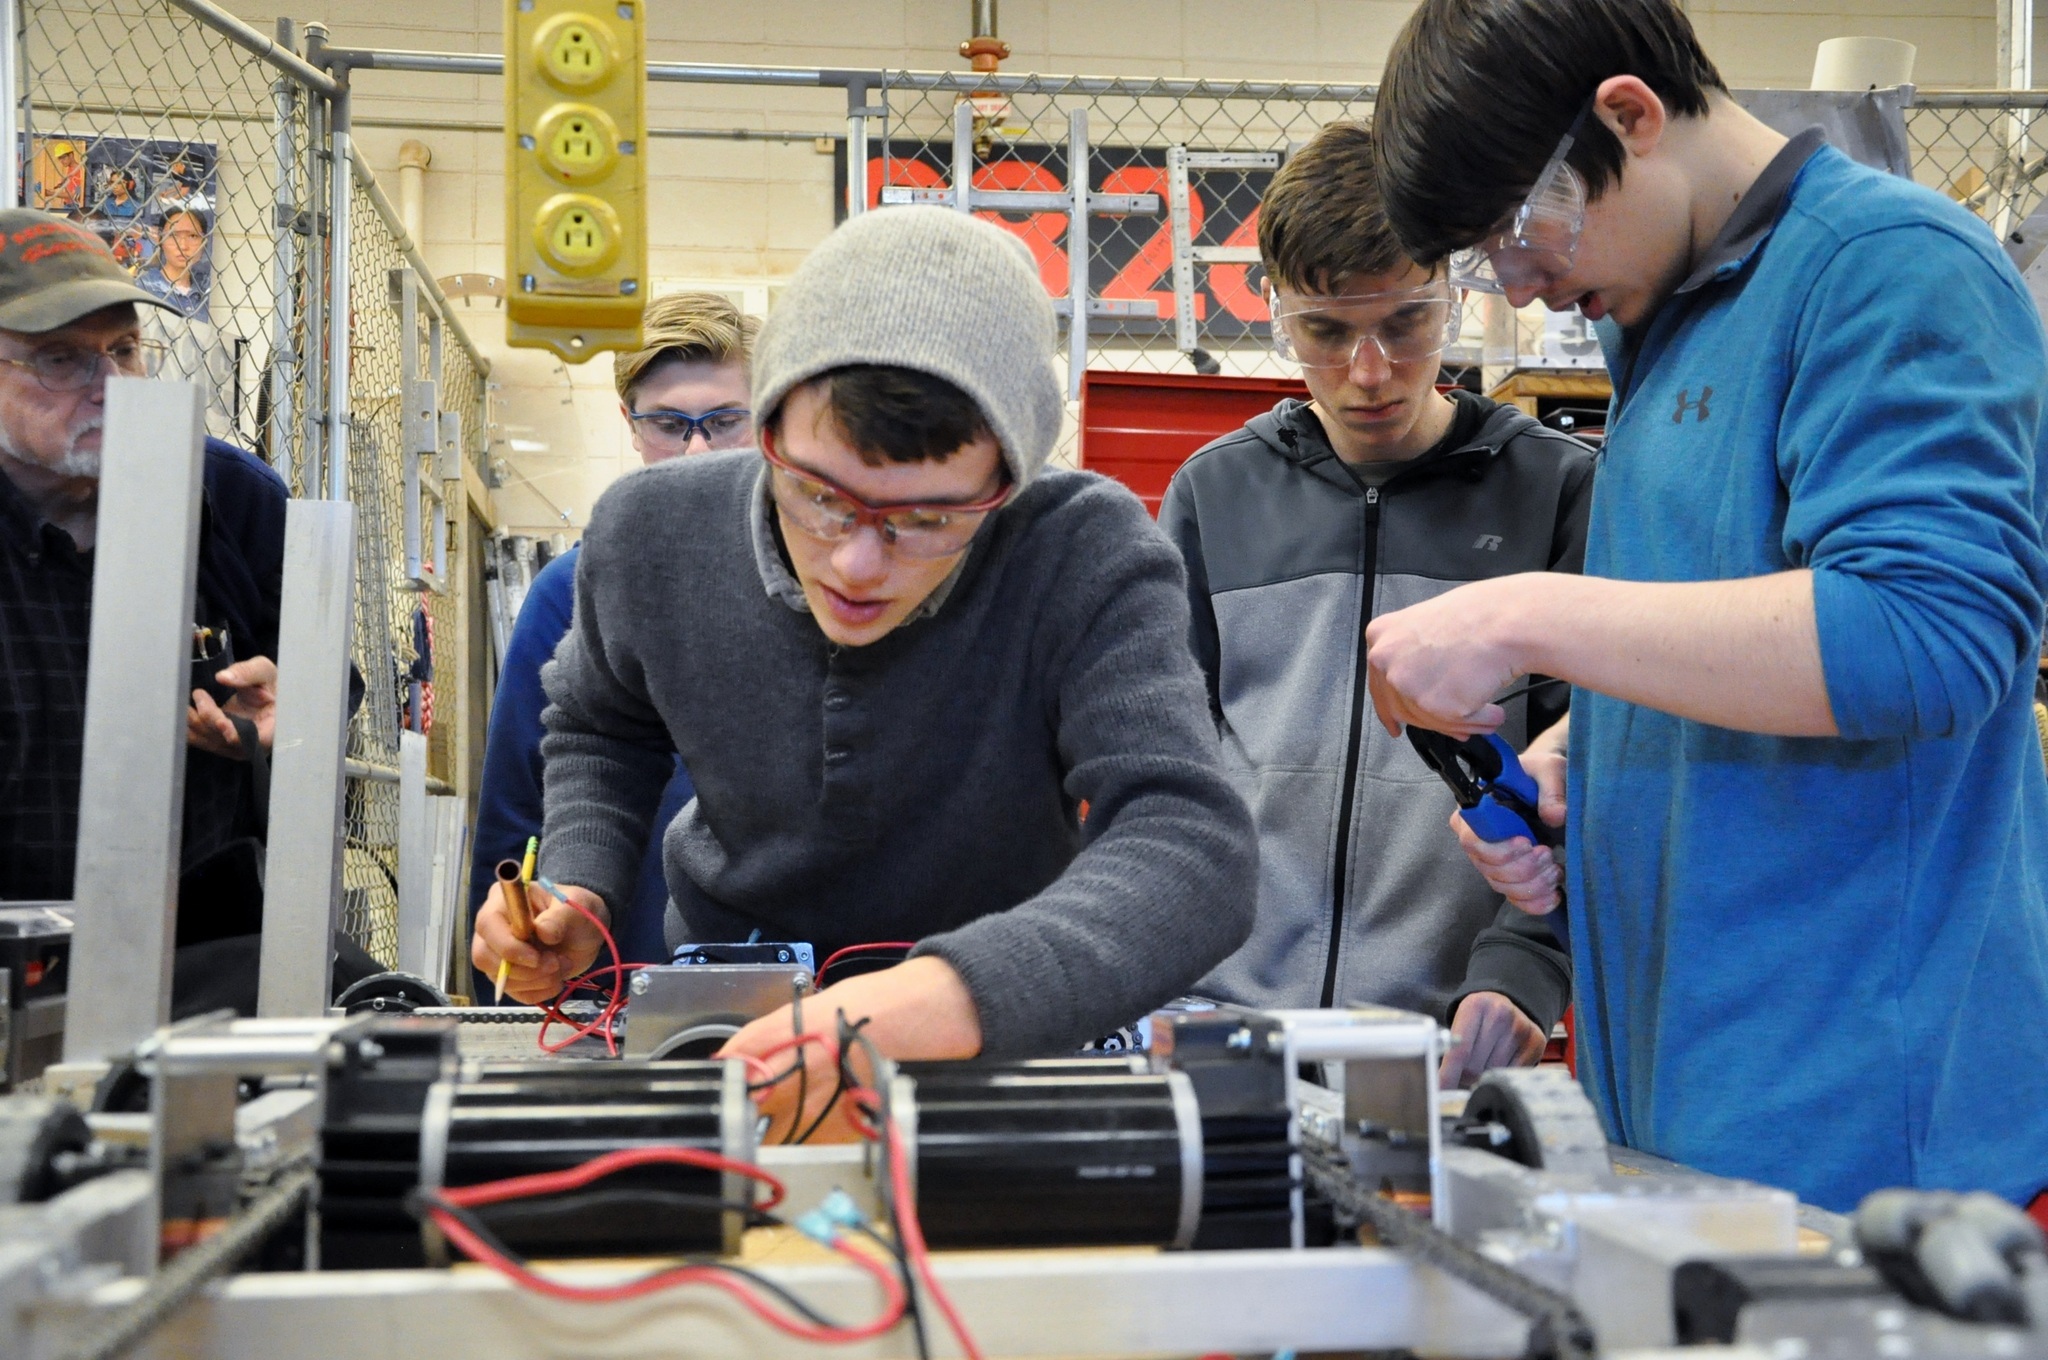 Sequim High School Robotics student Liam Byrne, foreground, works on a component of the robotic chassis, assisted by volunteer mentor Jerry Bileck, Brenton Barnes, Riley Scott and Riley Chase, from left. (Patsene Dashiell)